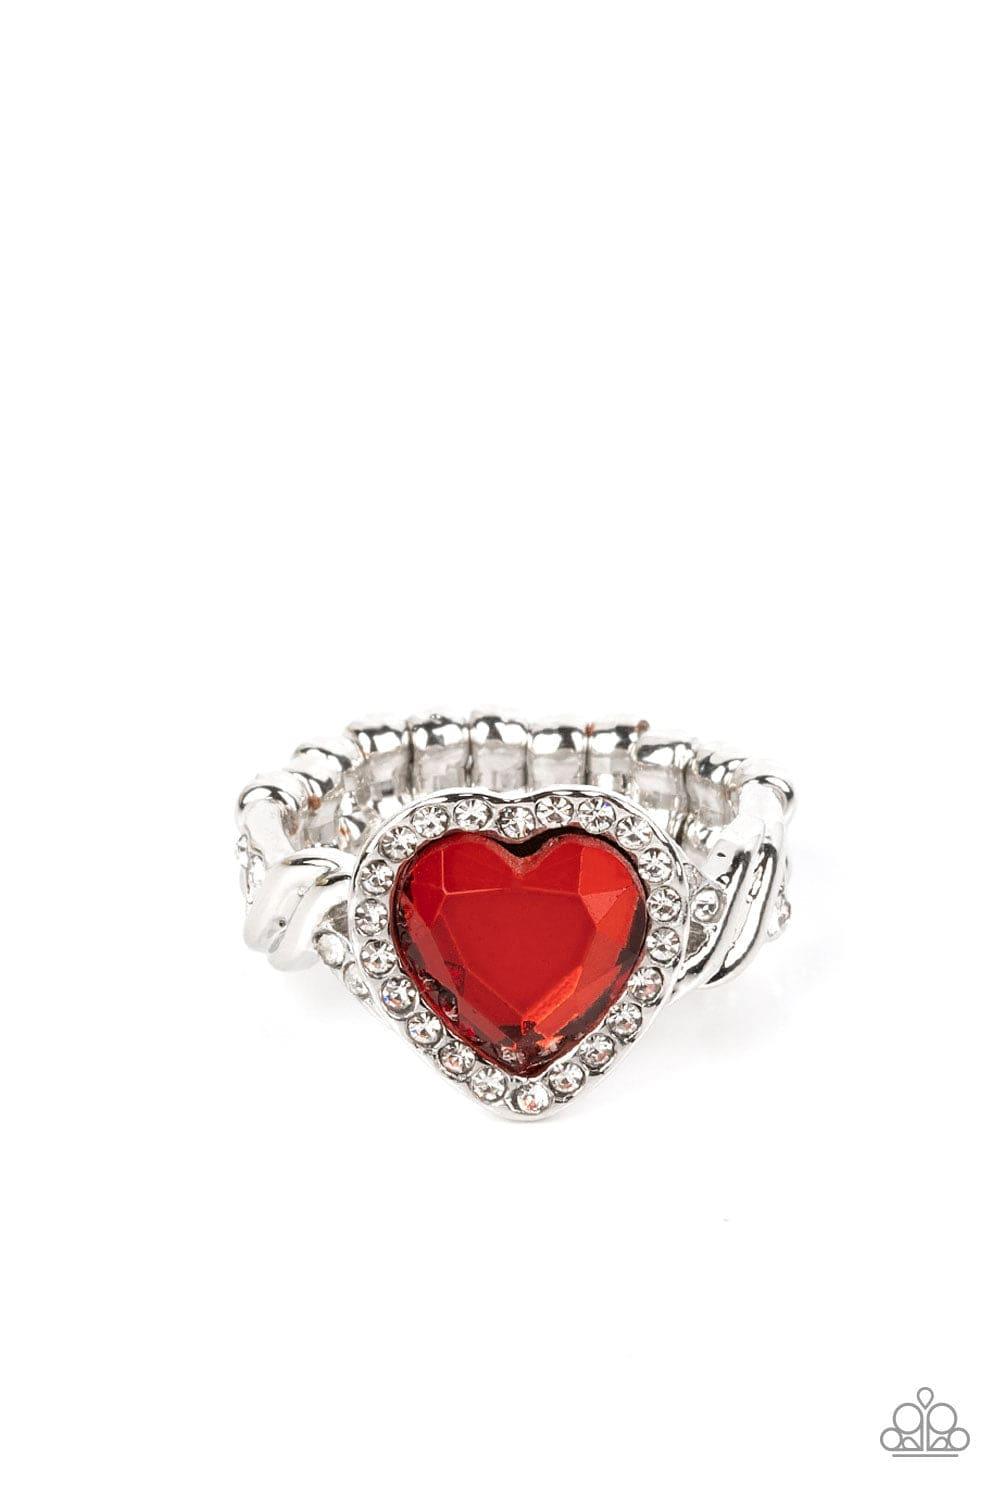 Paparazzi Accessories - Committed To Cupid - Red Ring - Bling by JessieK